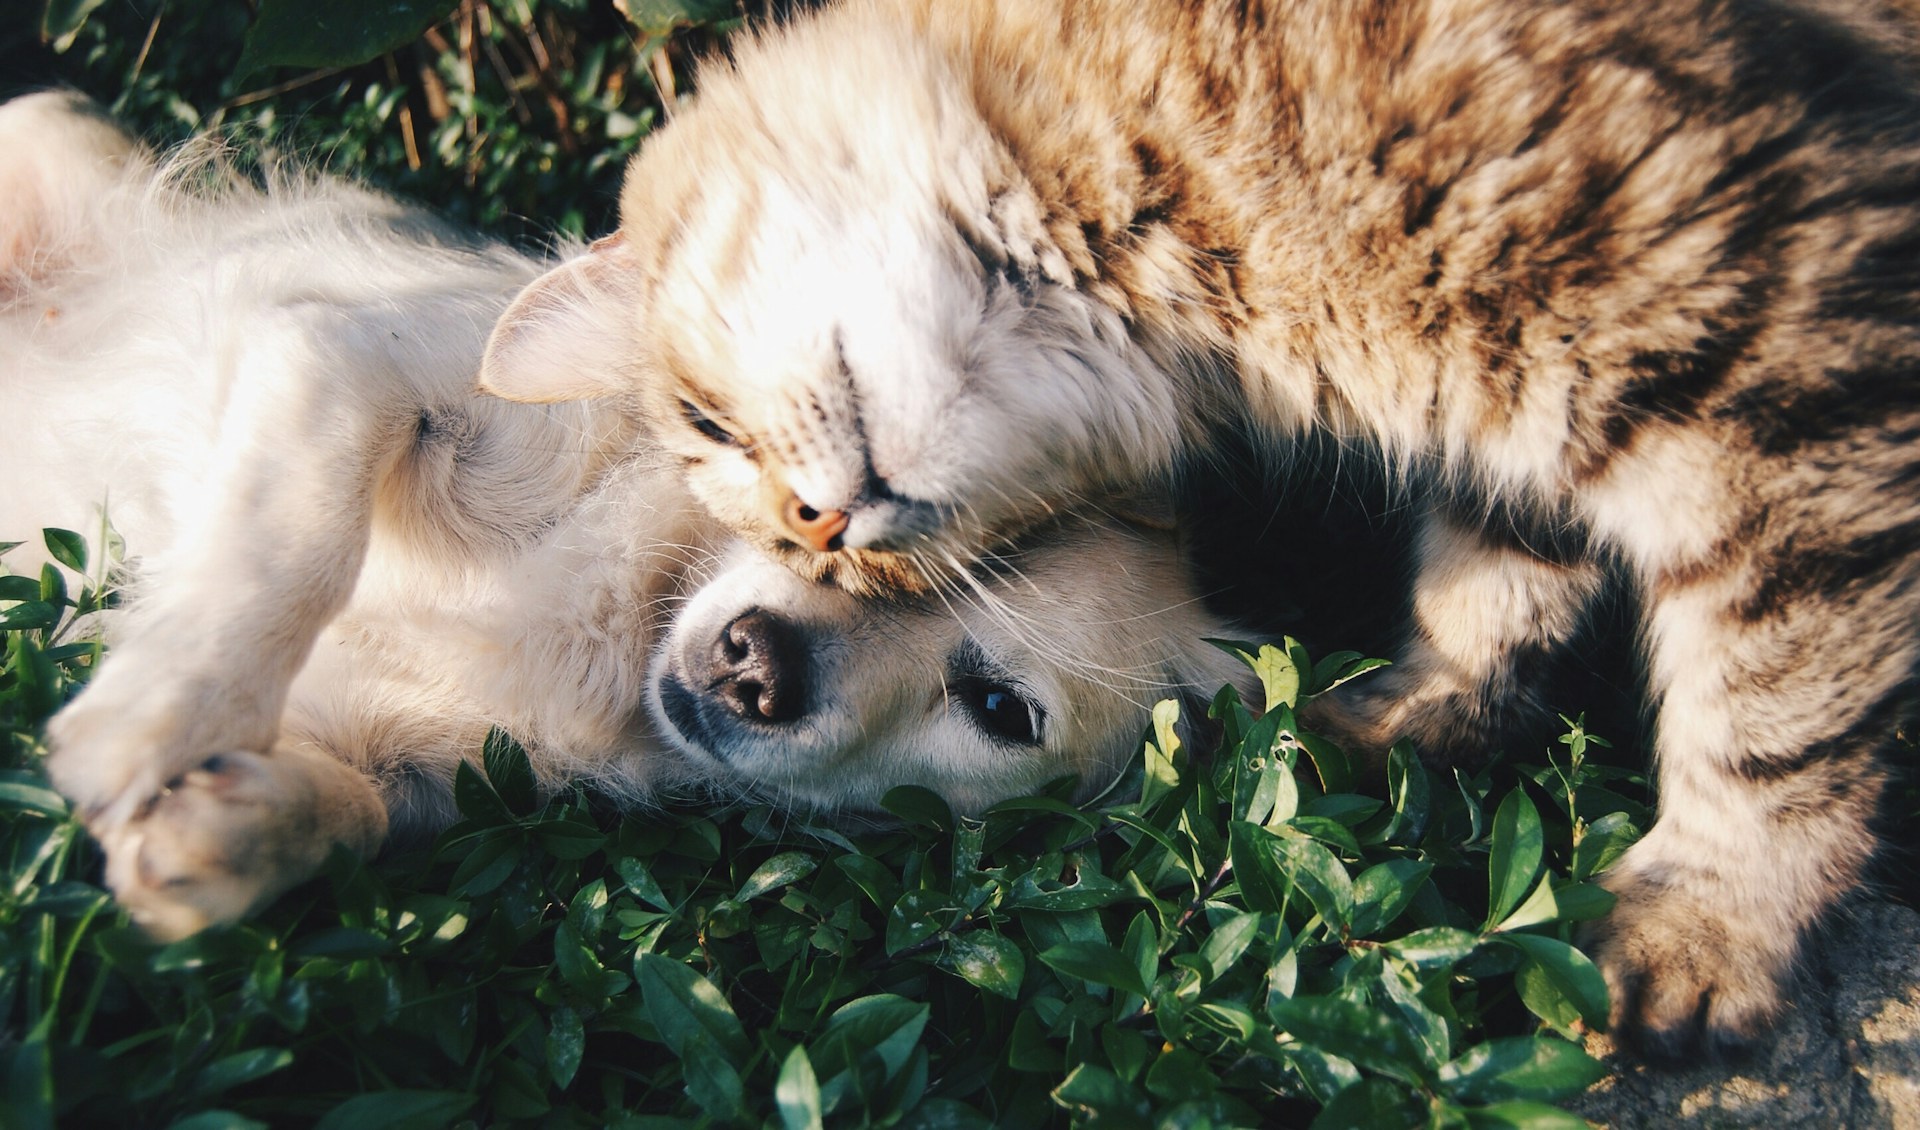 dog and cat laying together in grass